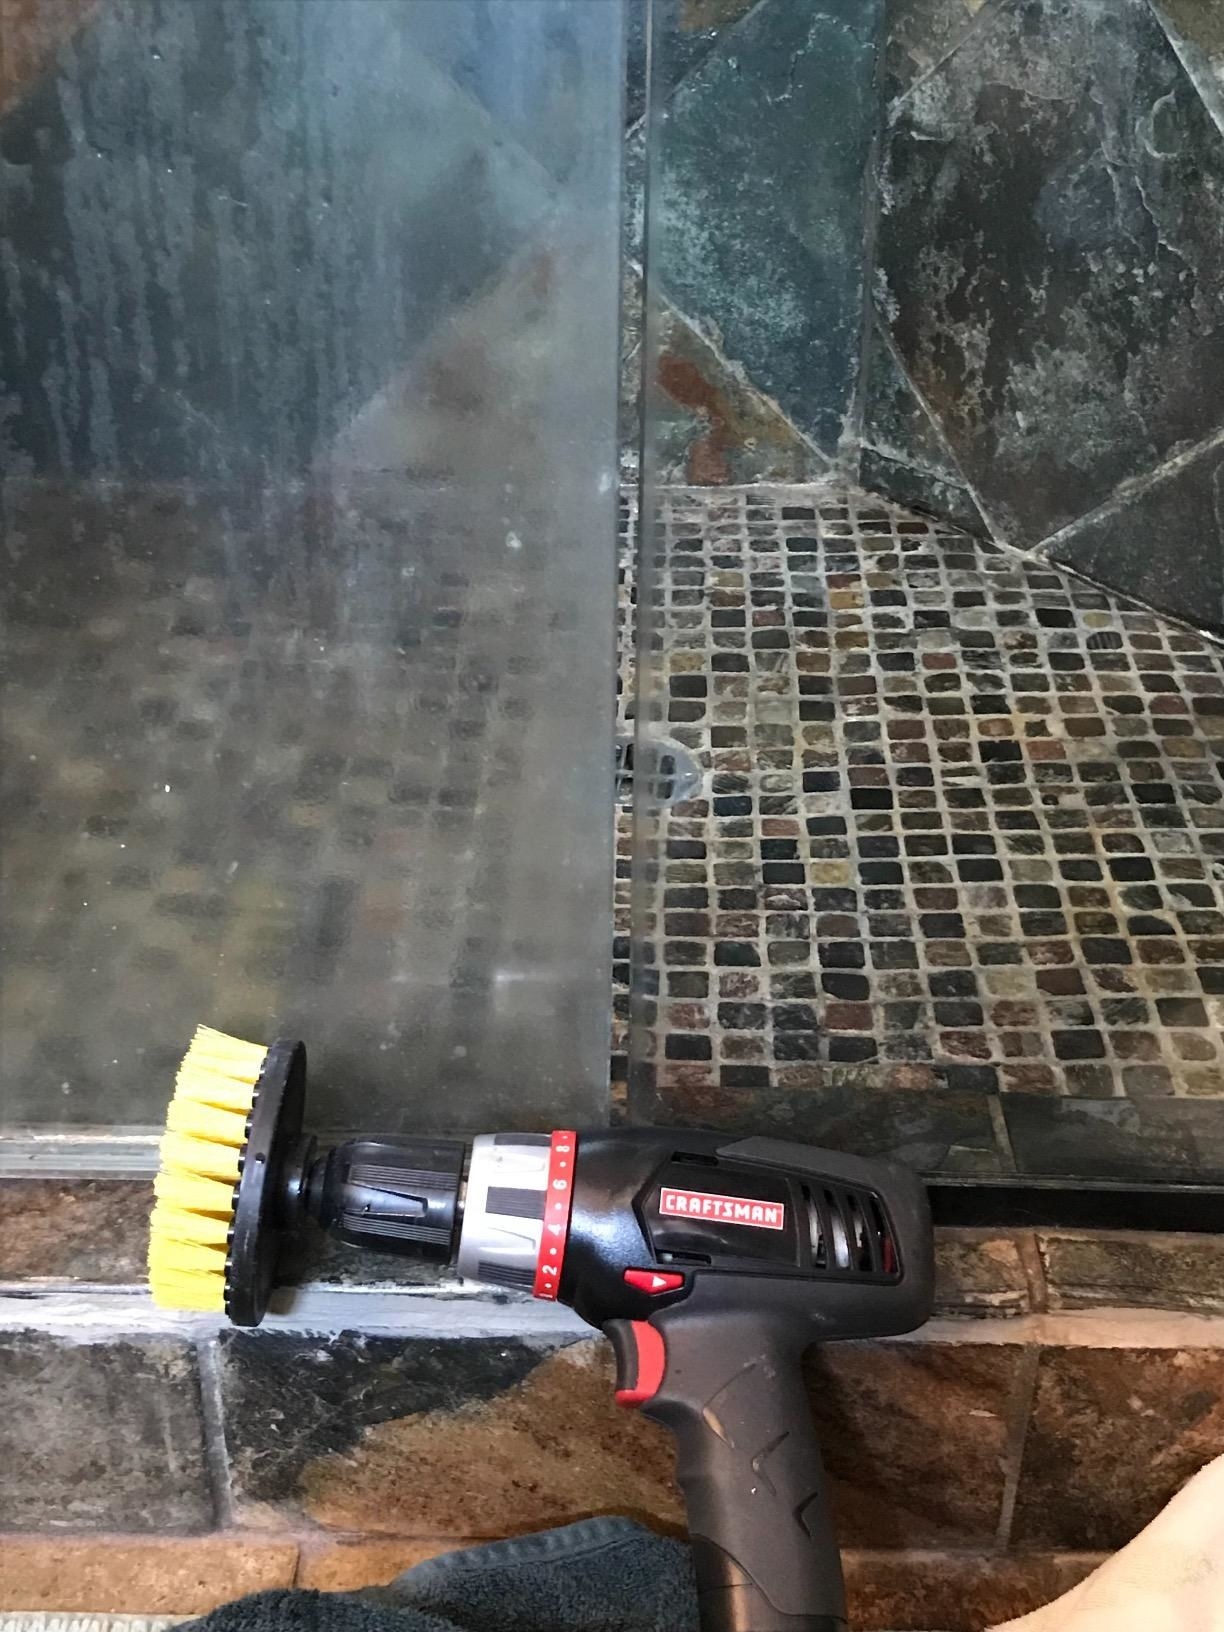 A reviewer photo of their glass shower: one panel is cloudy with soapscum and hard water, the other panel is clean and clearly shows the tile behind it